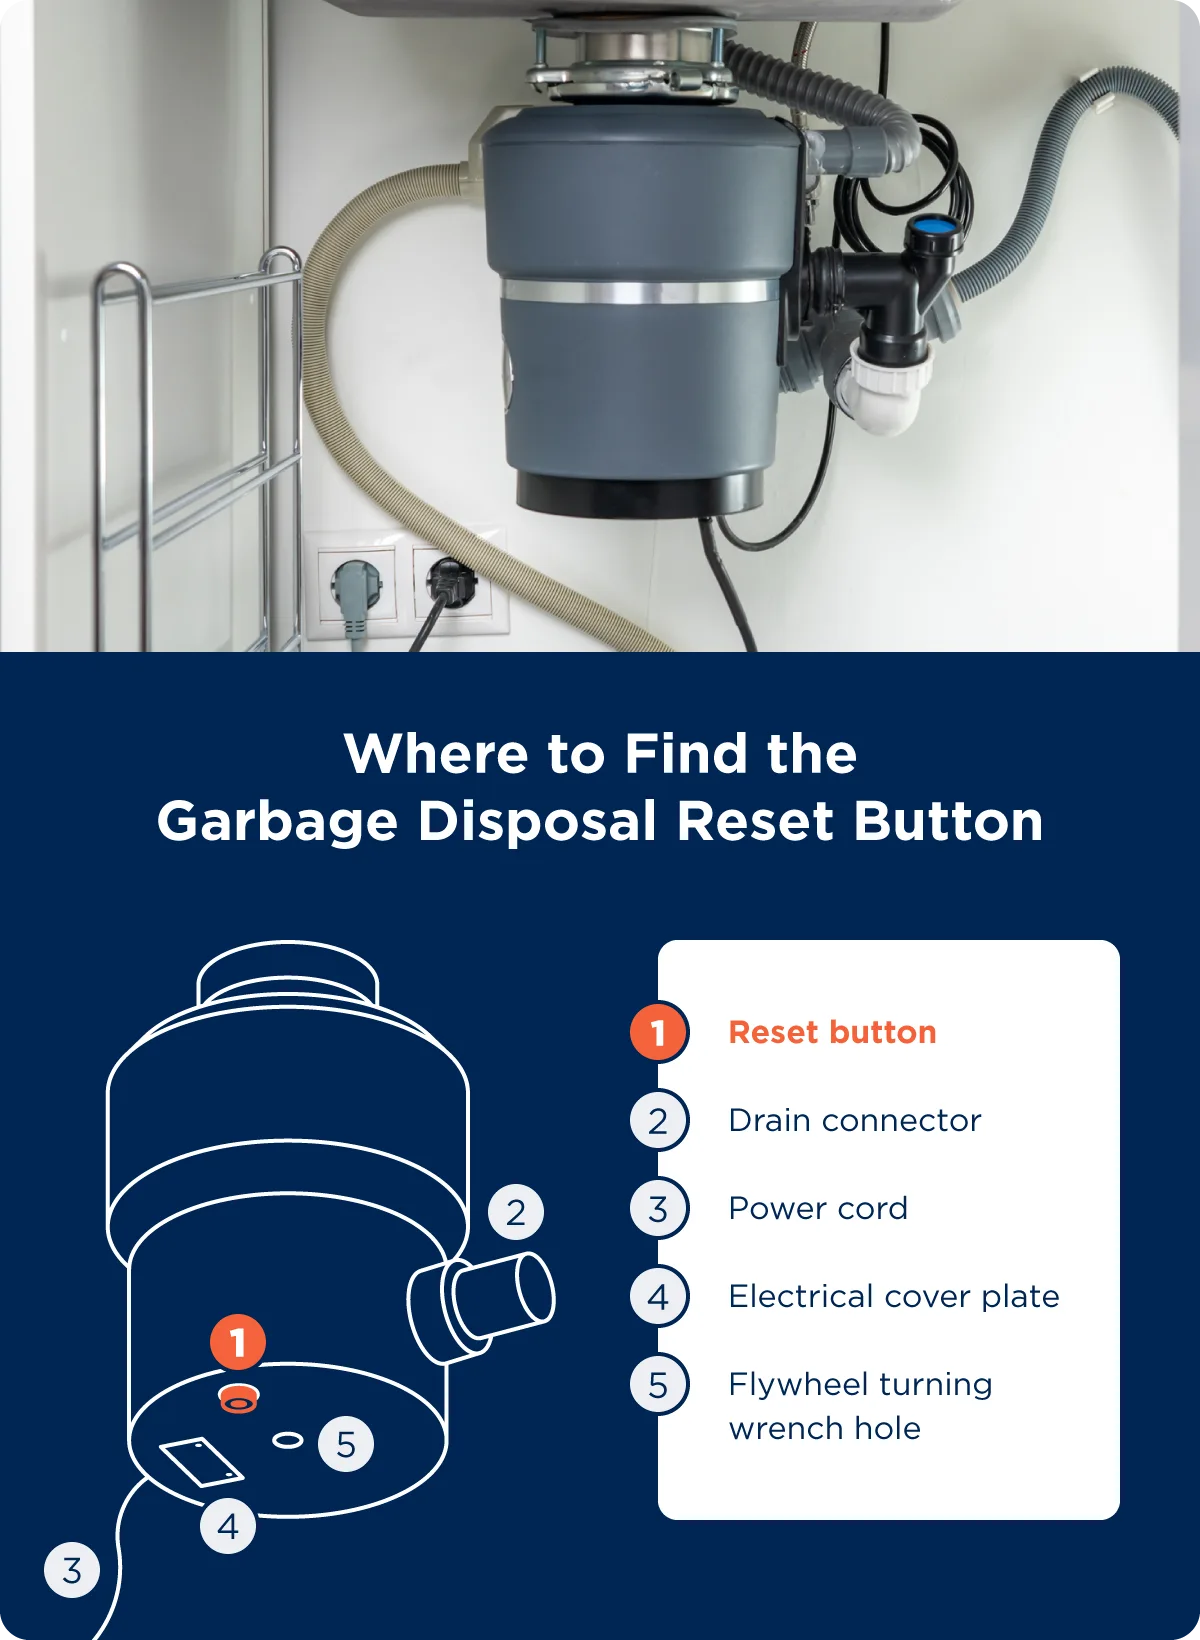 https://www.mrappliance.com/us/en-us/mr-appliance/_assets/expert-tips/images/mra-blog-where-to-find-the-garbage-disposal-reset-button.webp